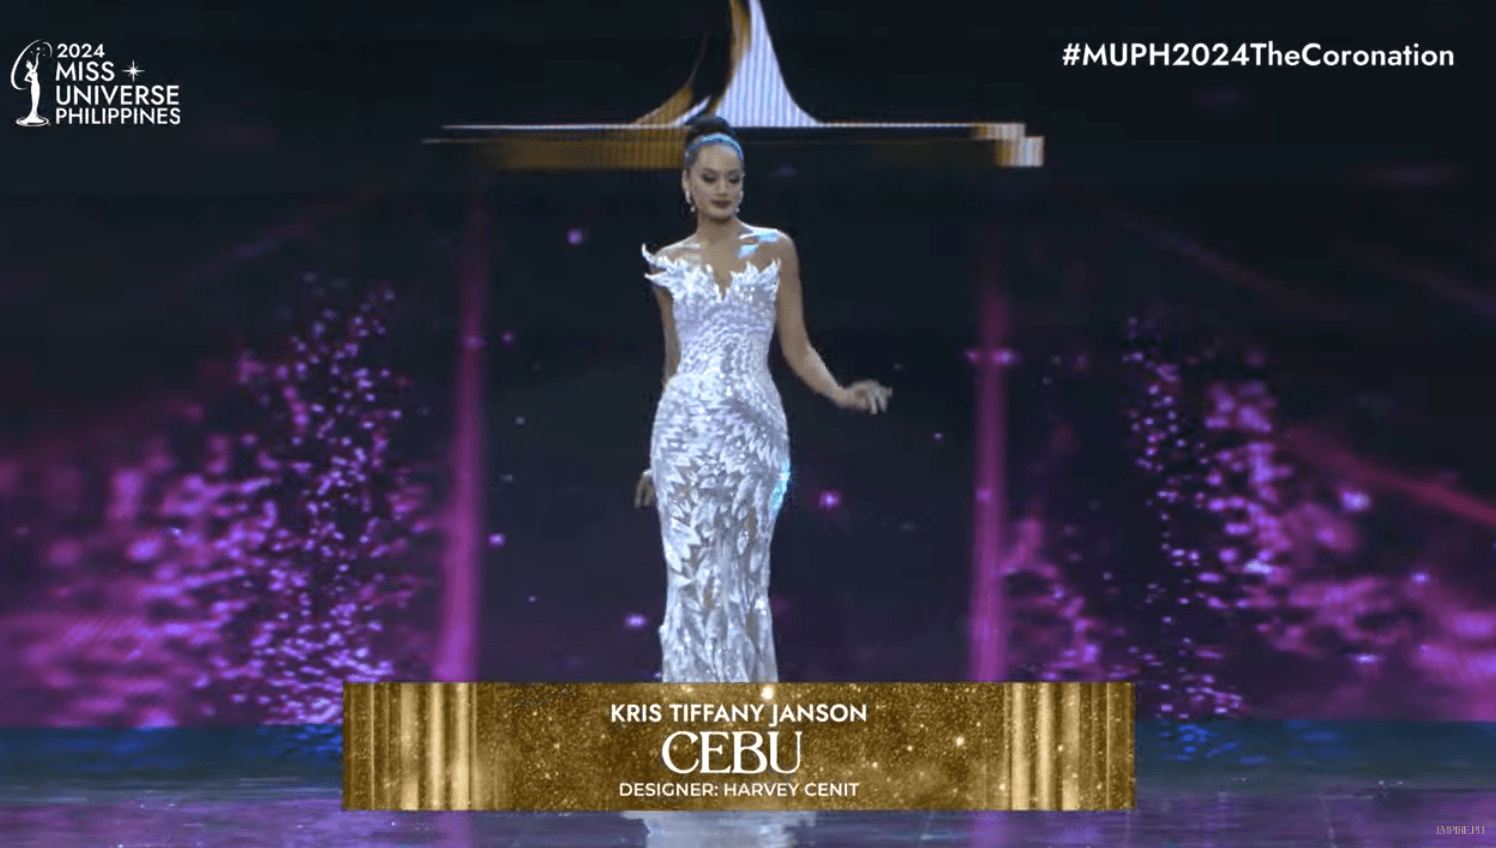 IN PHOTOS: Miss Universe Philippines 2024 evening gown segment